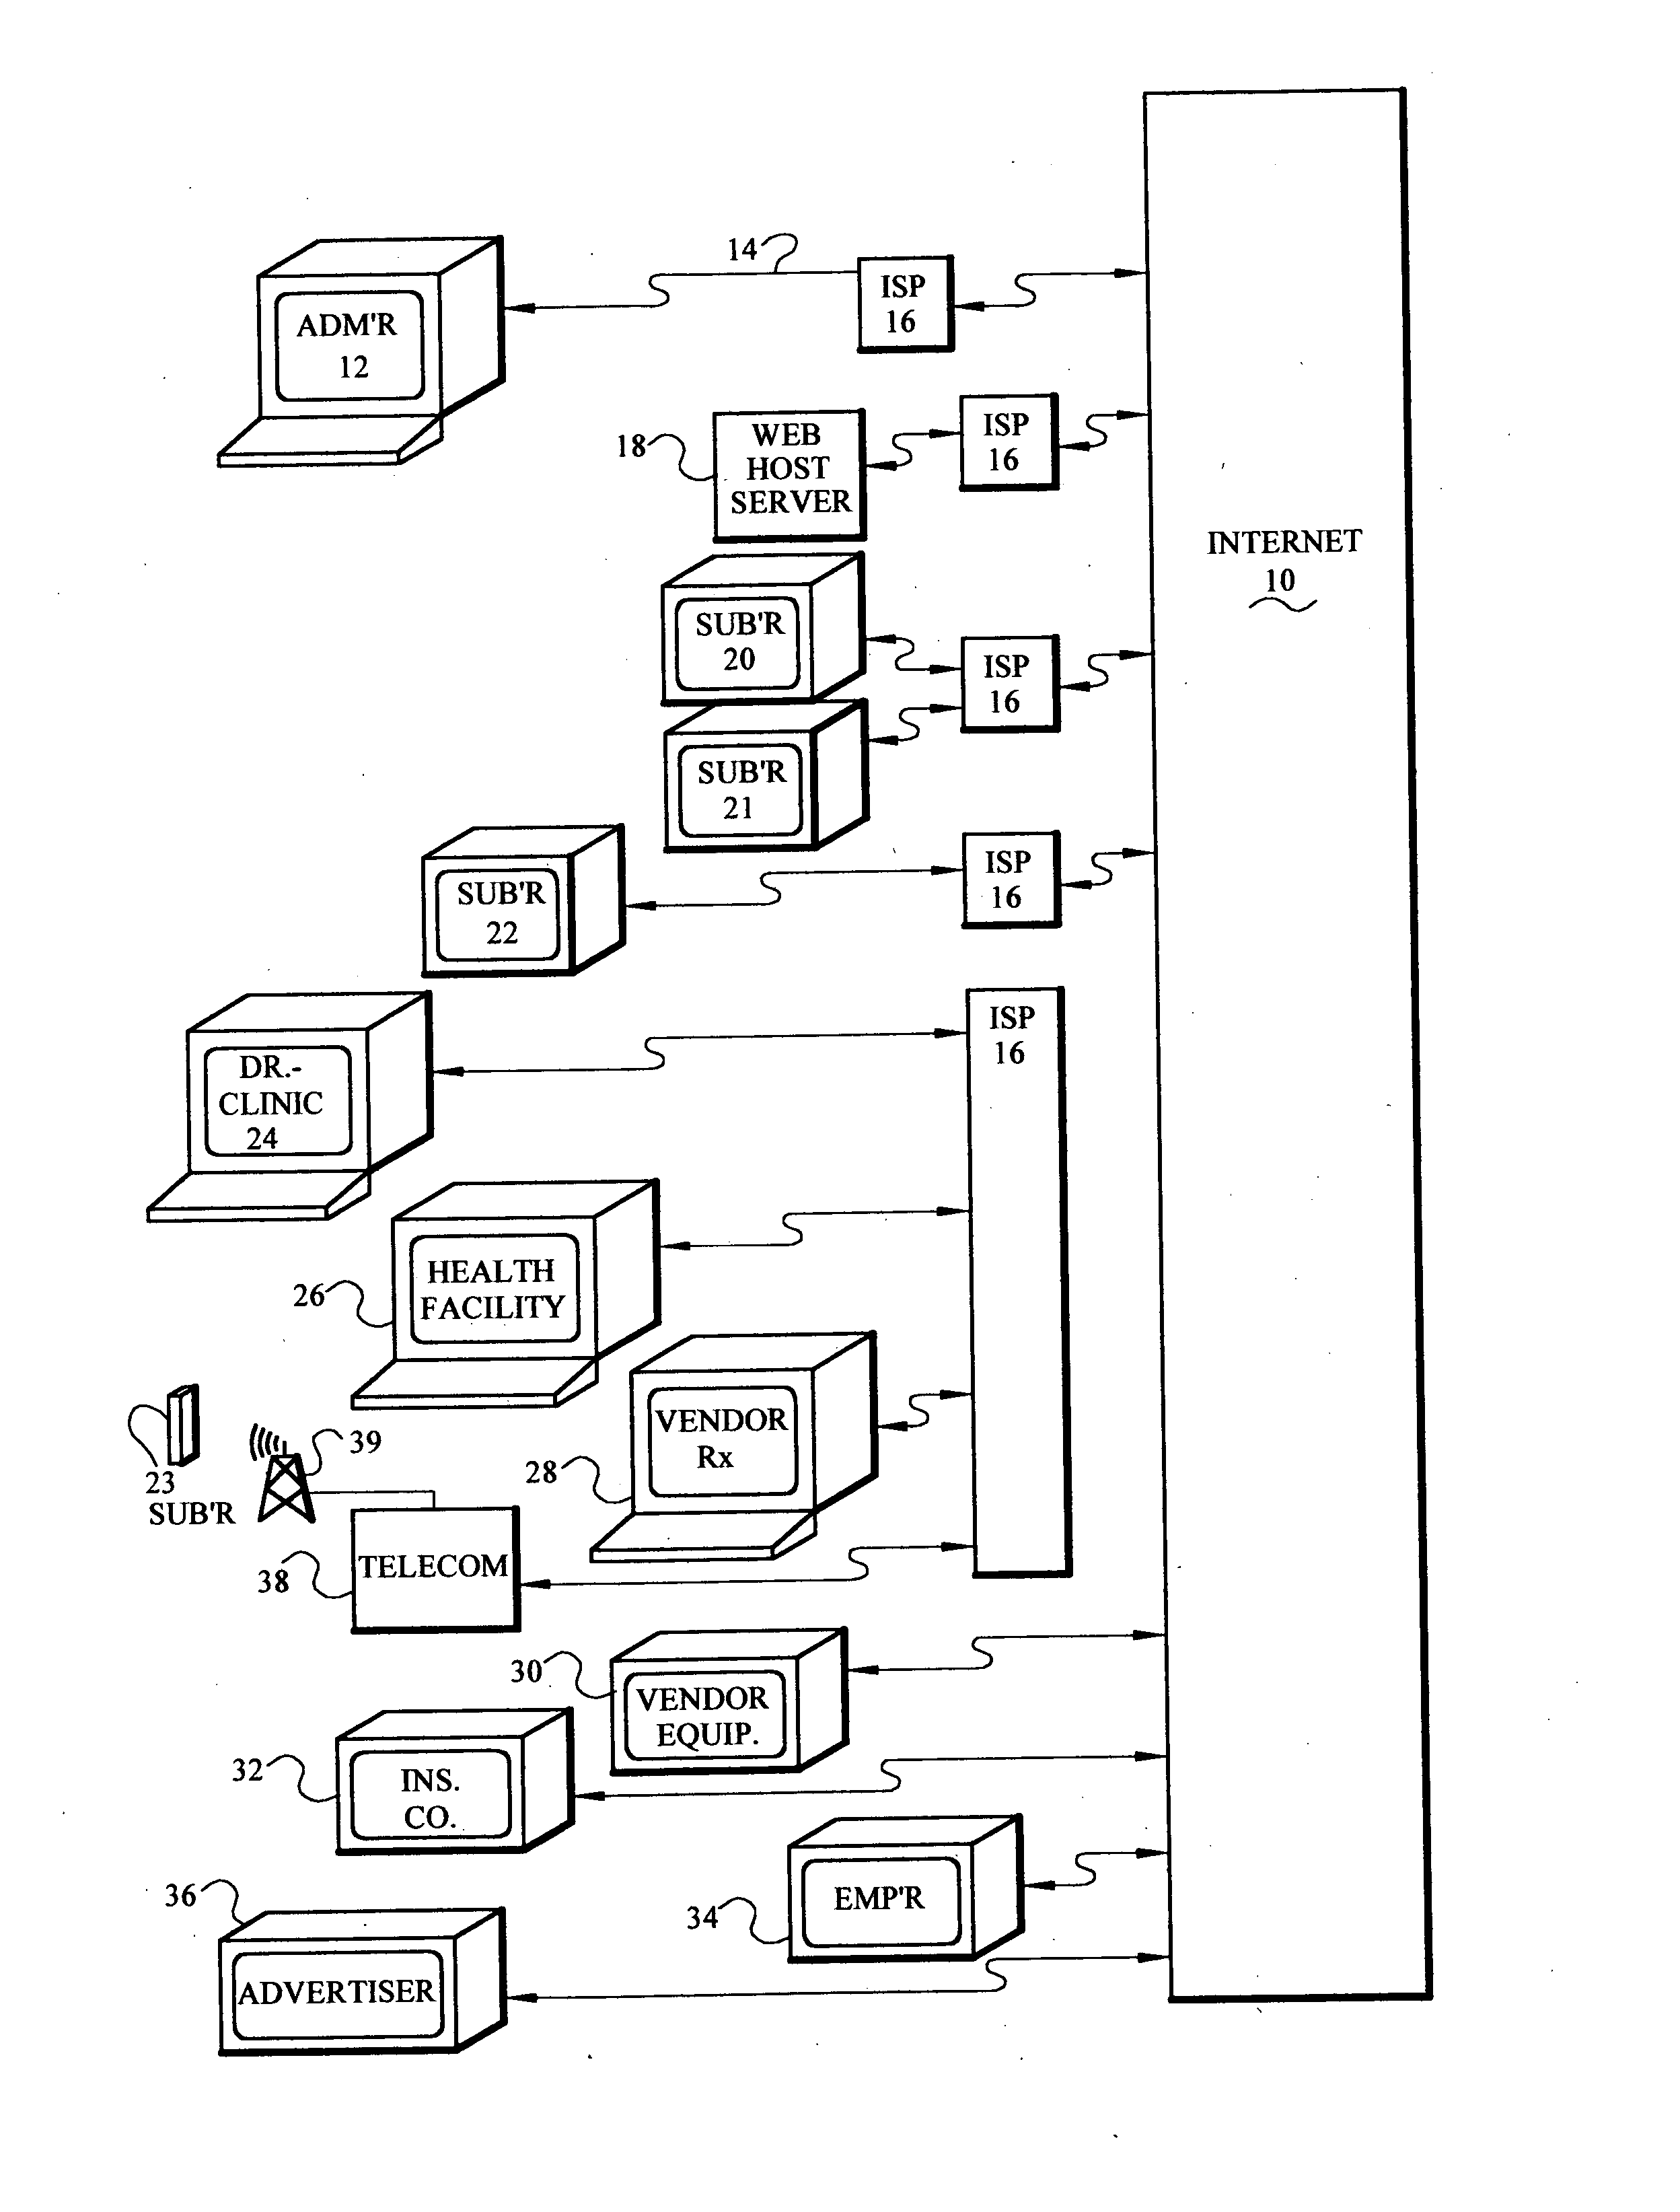 Computer based risk level monitor and patient compliance method and system